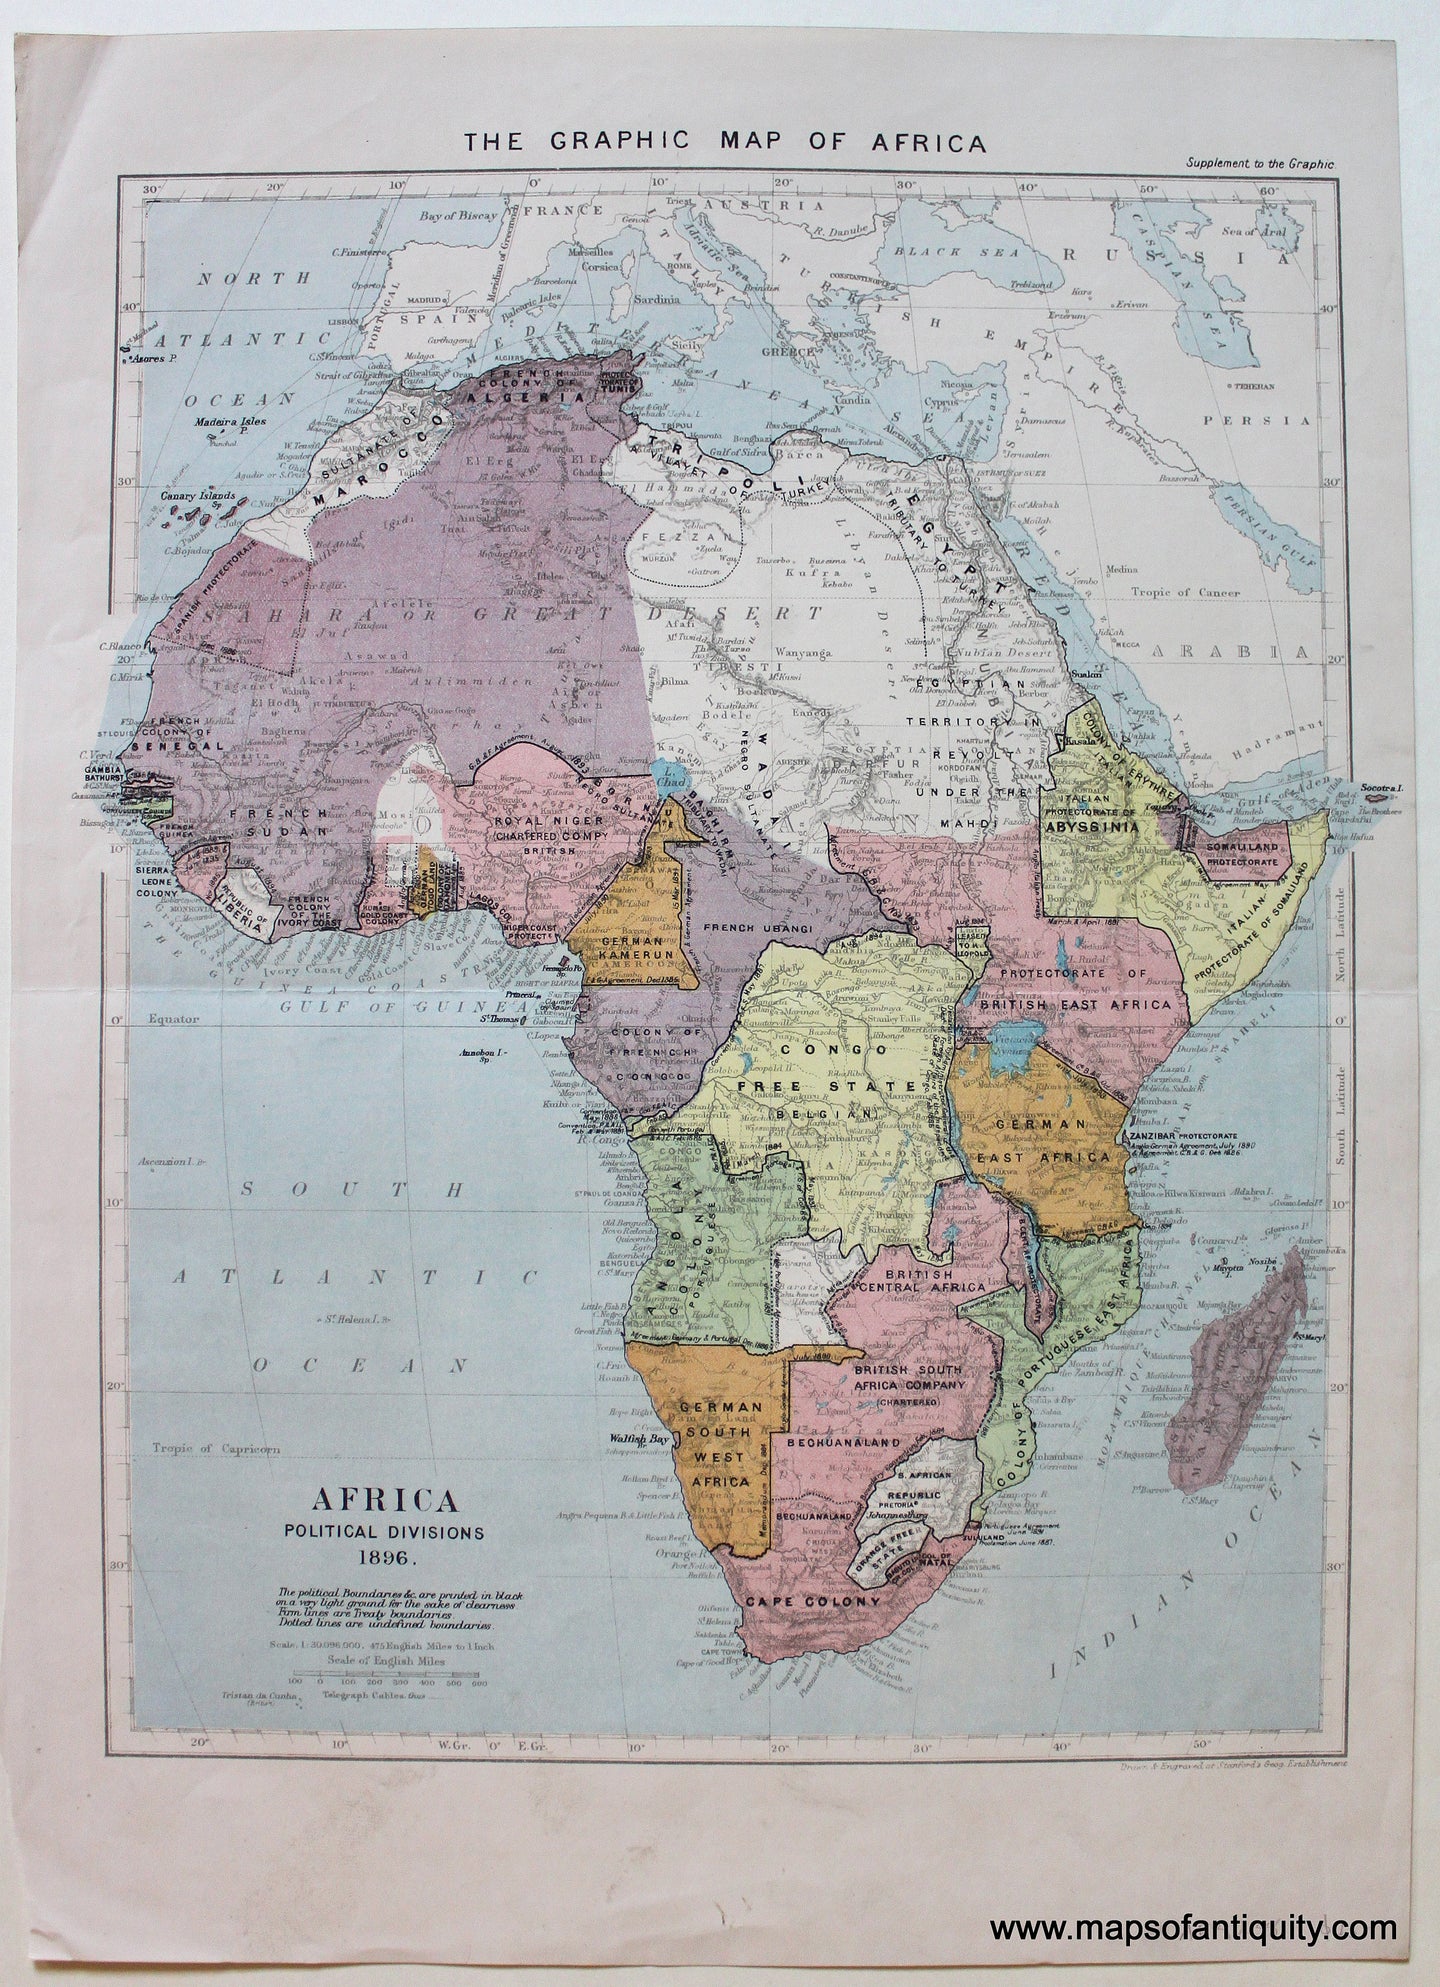 Antique-Printed-Color-Map-The-Graphic-Map-of-Africa-c.-1896-Stanford-The-Graphic-1800s-19th-century-Maps-of-Antiquity